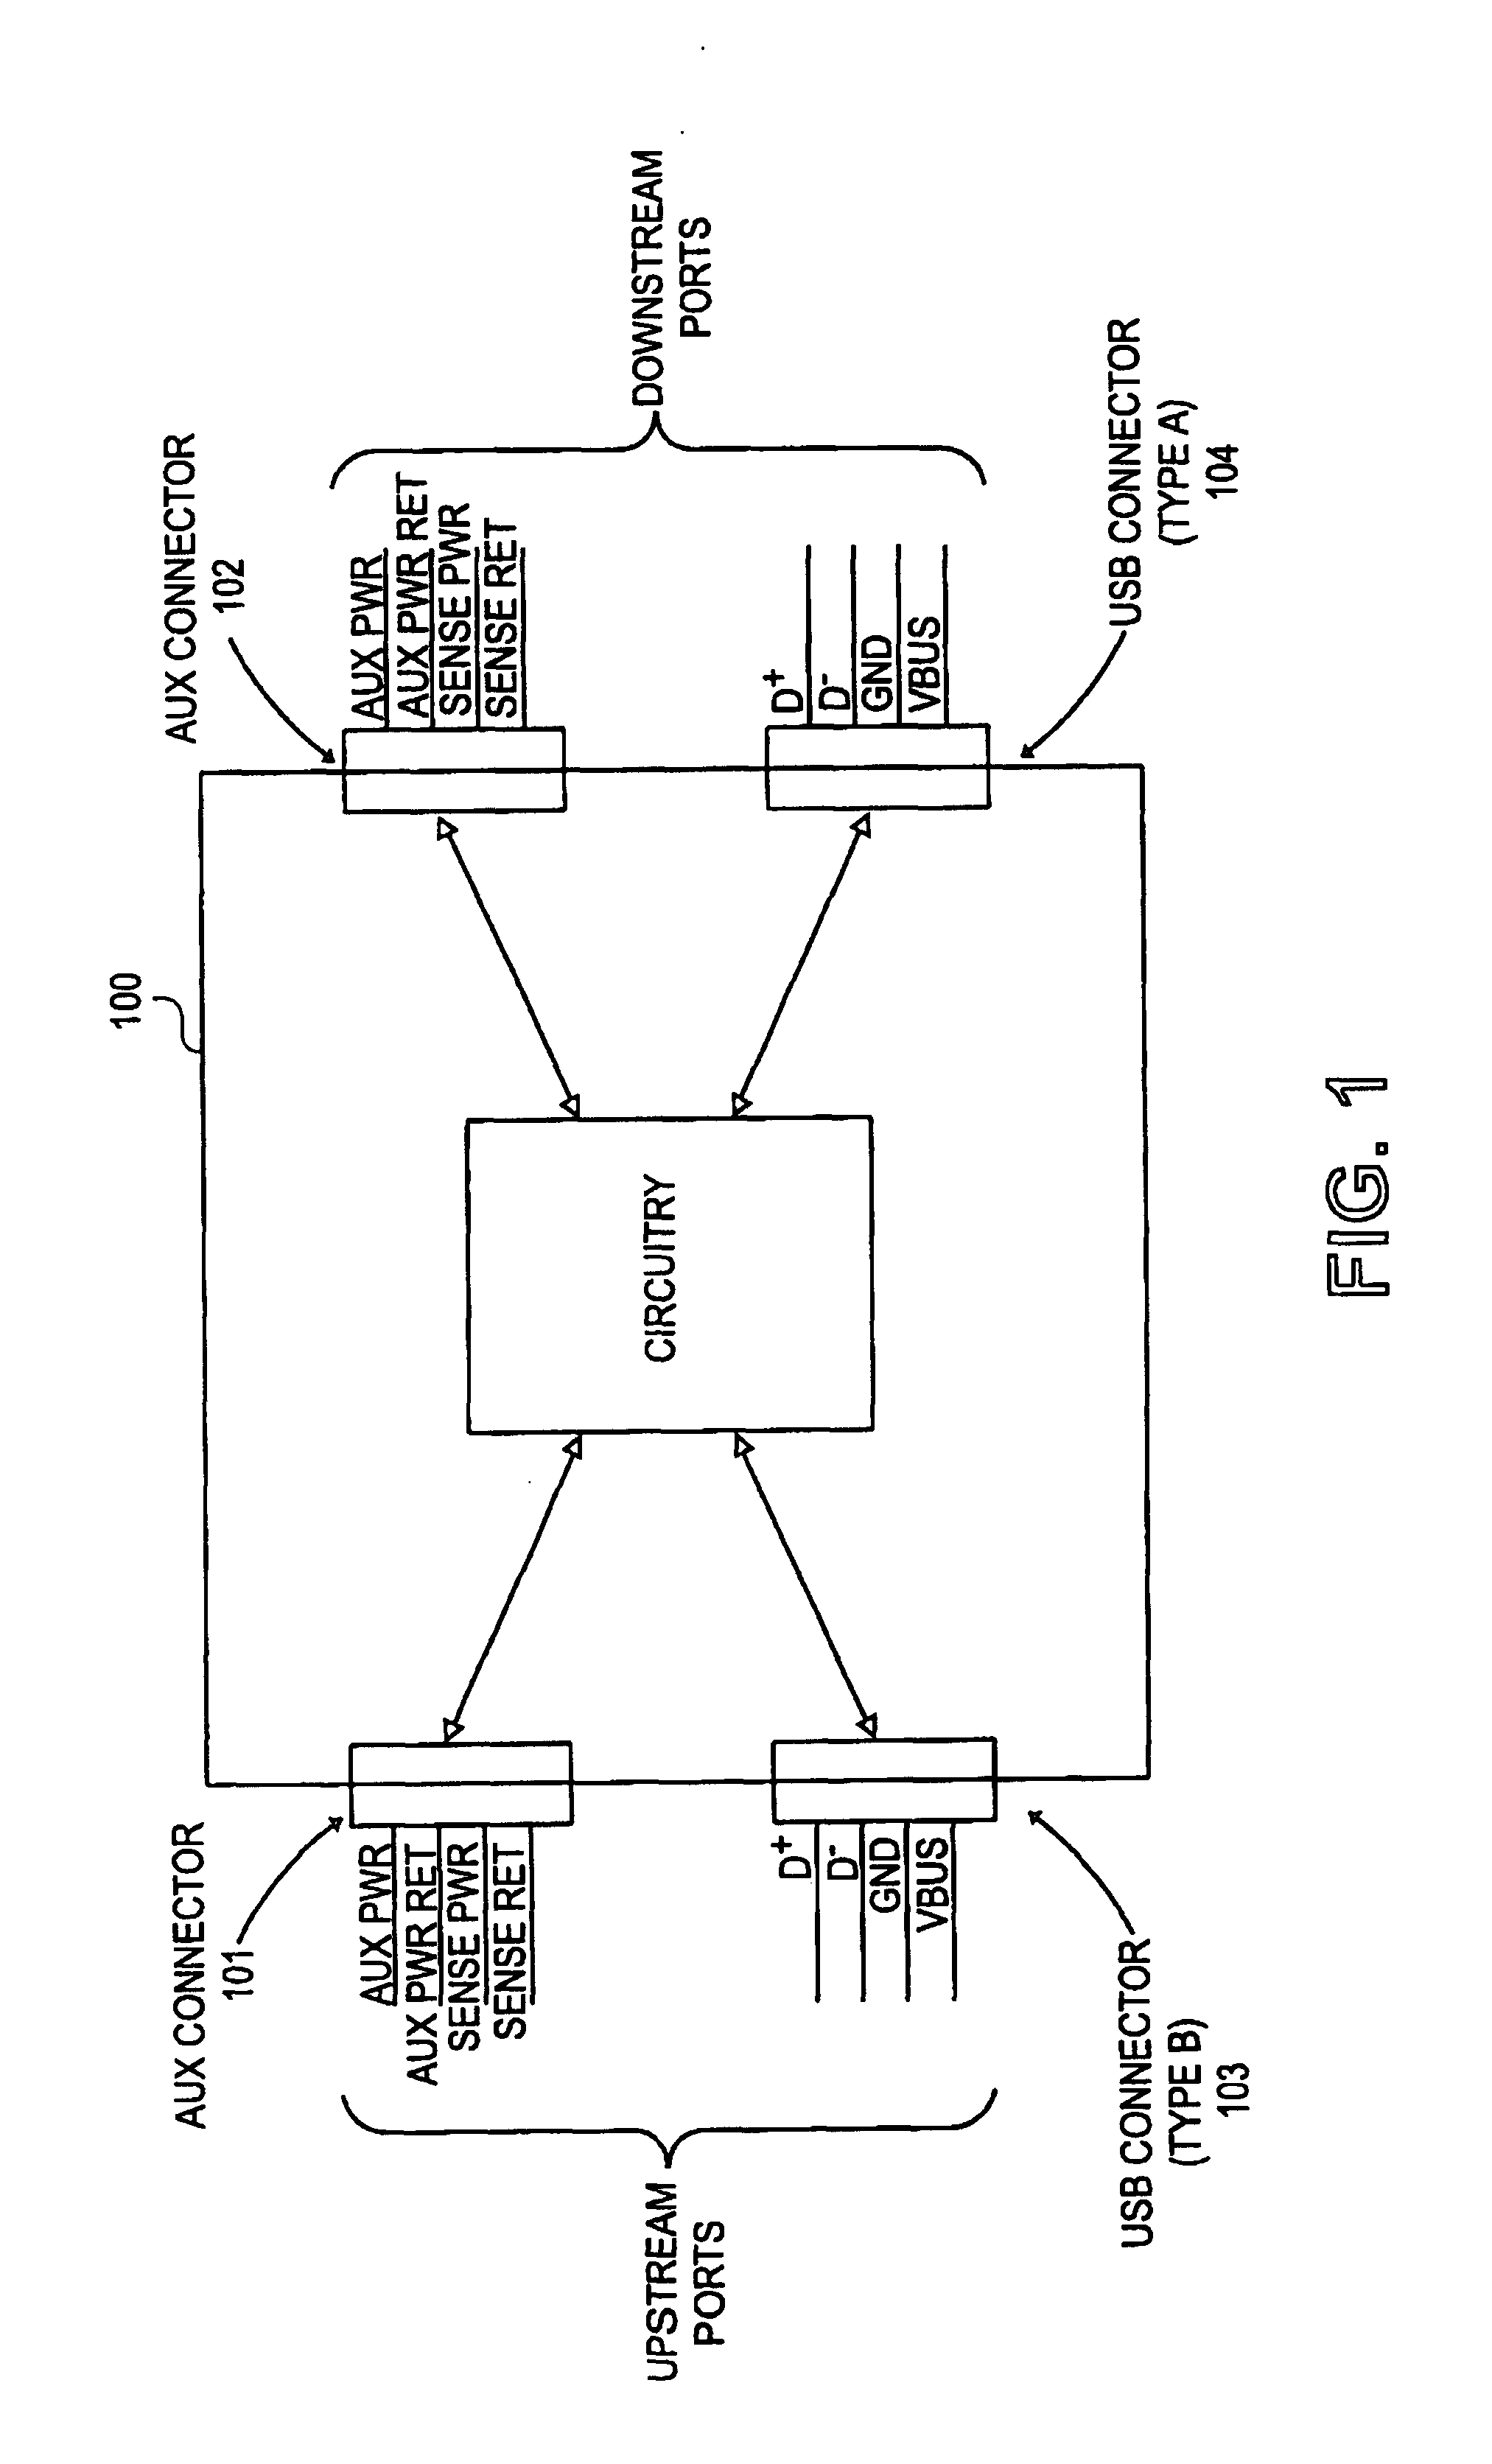 Method and apparatus for extending communications over USB